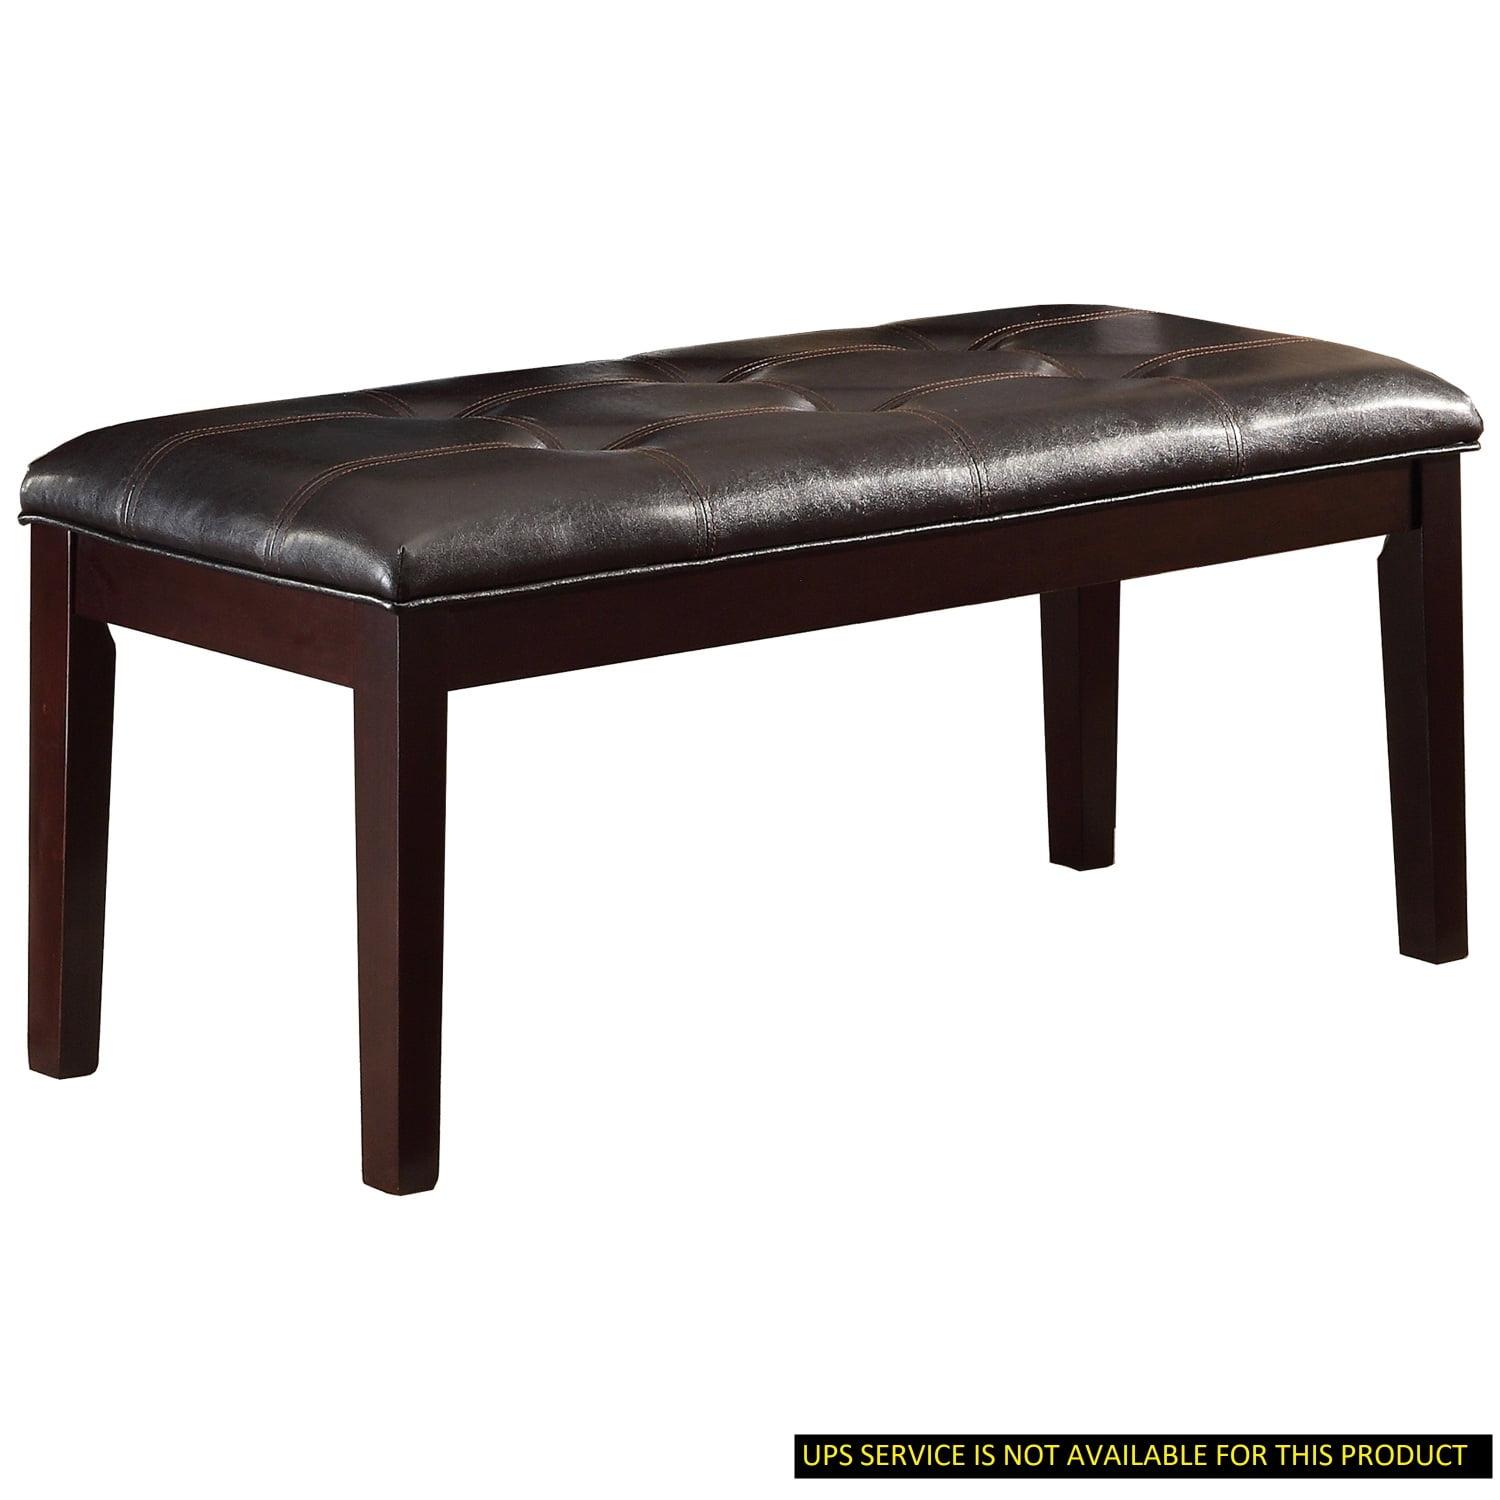 Espresso Brown Faux Leather Tufted 49" Wooden Bench